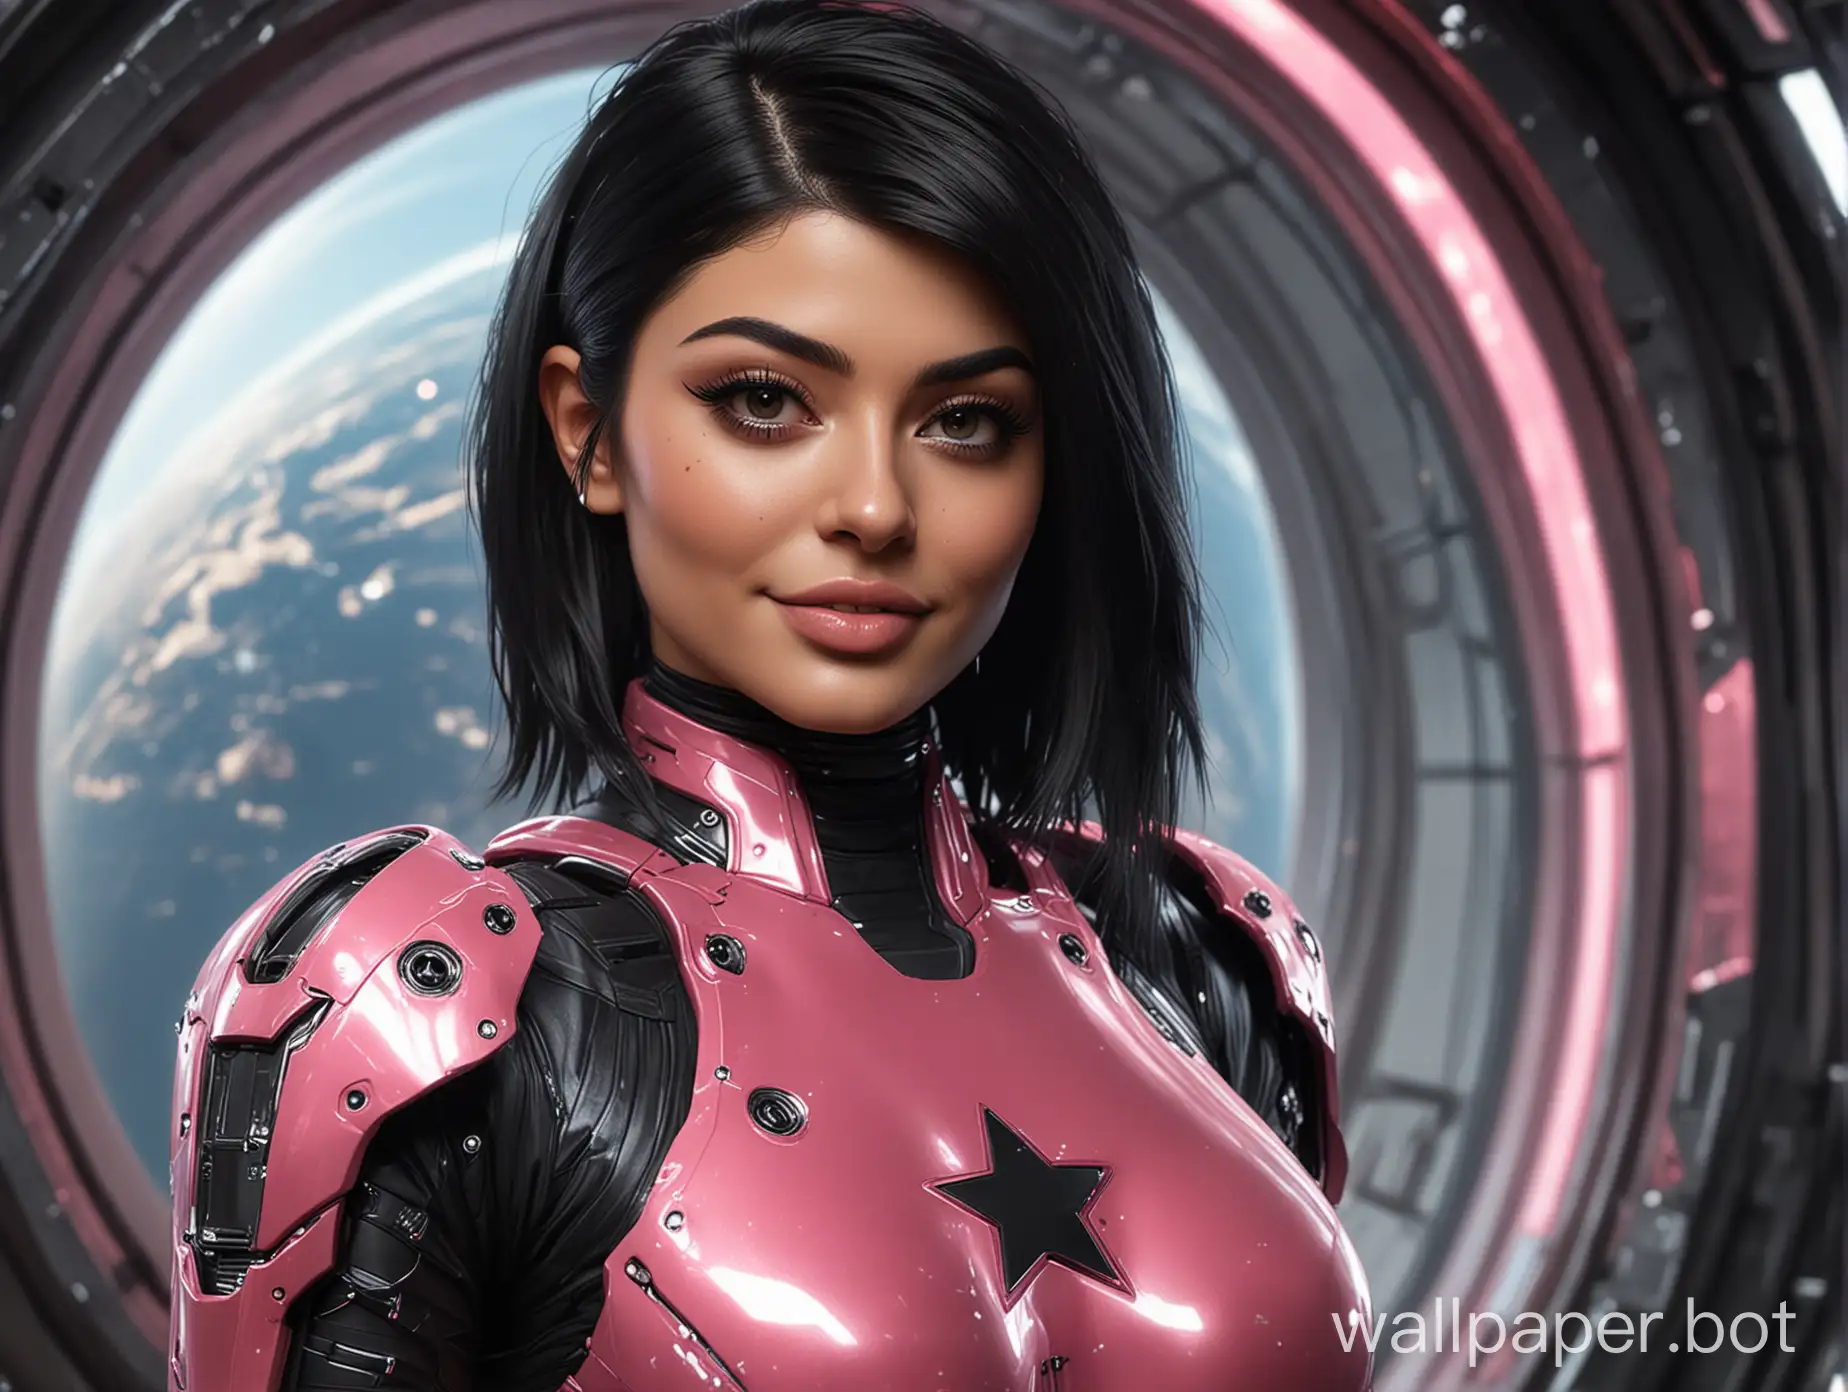 Kylie-Jenner-in-Futuristic-Cyber-Armor-Selfie-with-Cosmic-Background